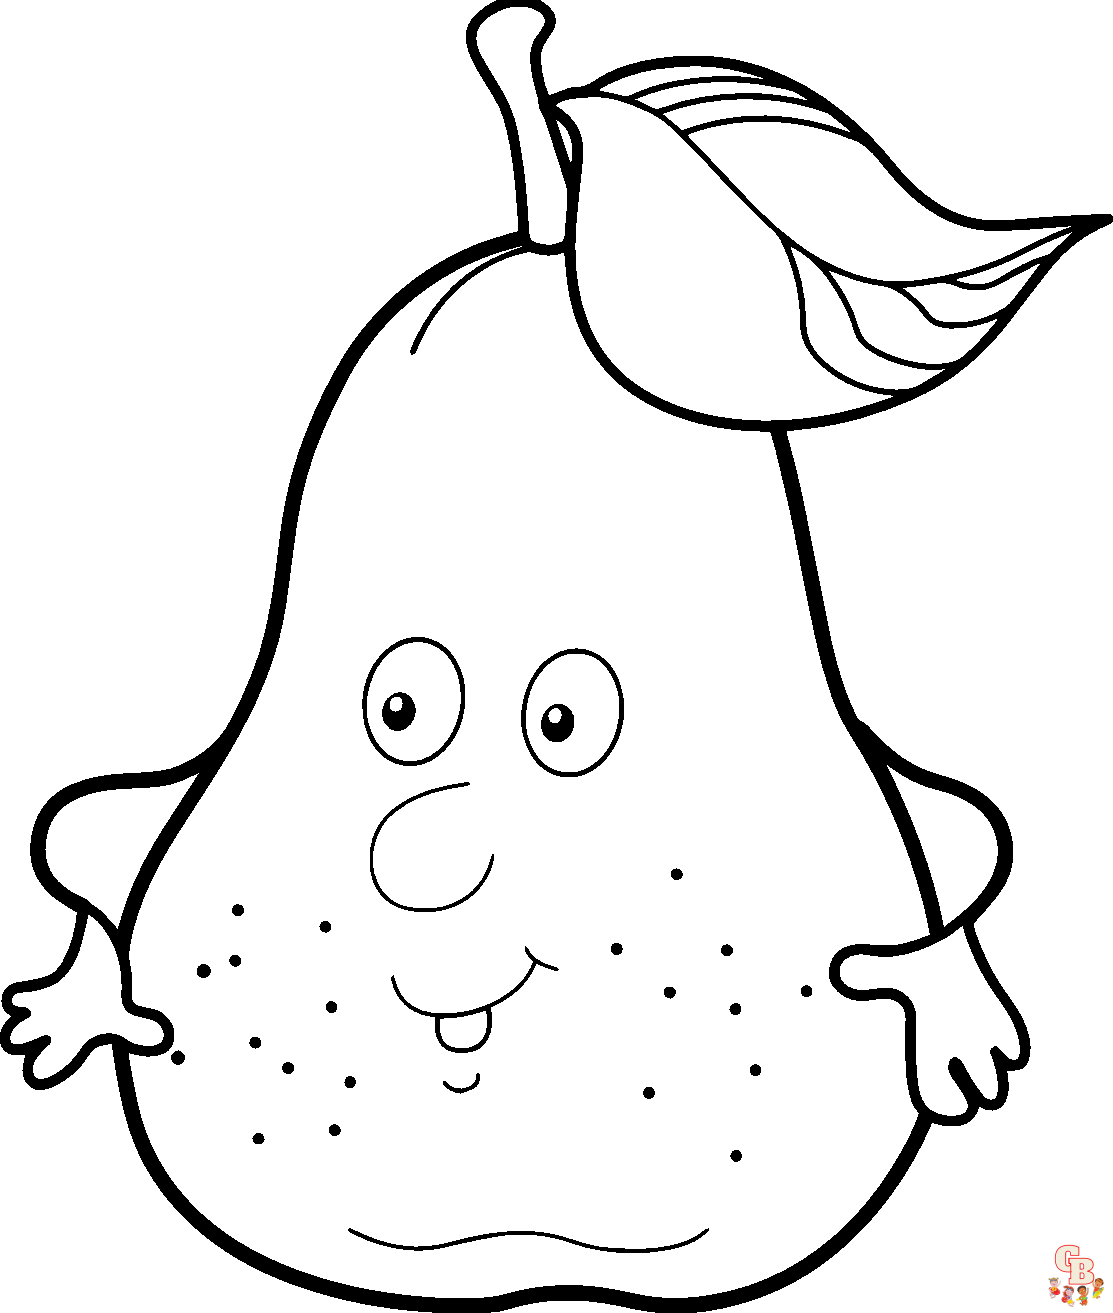 Free Pear coloring pages for kids